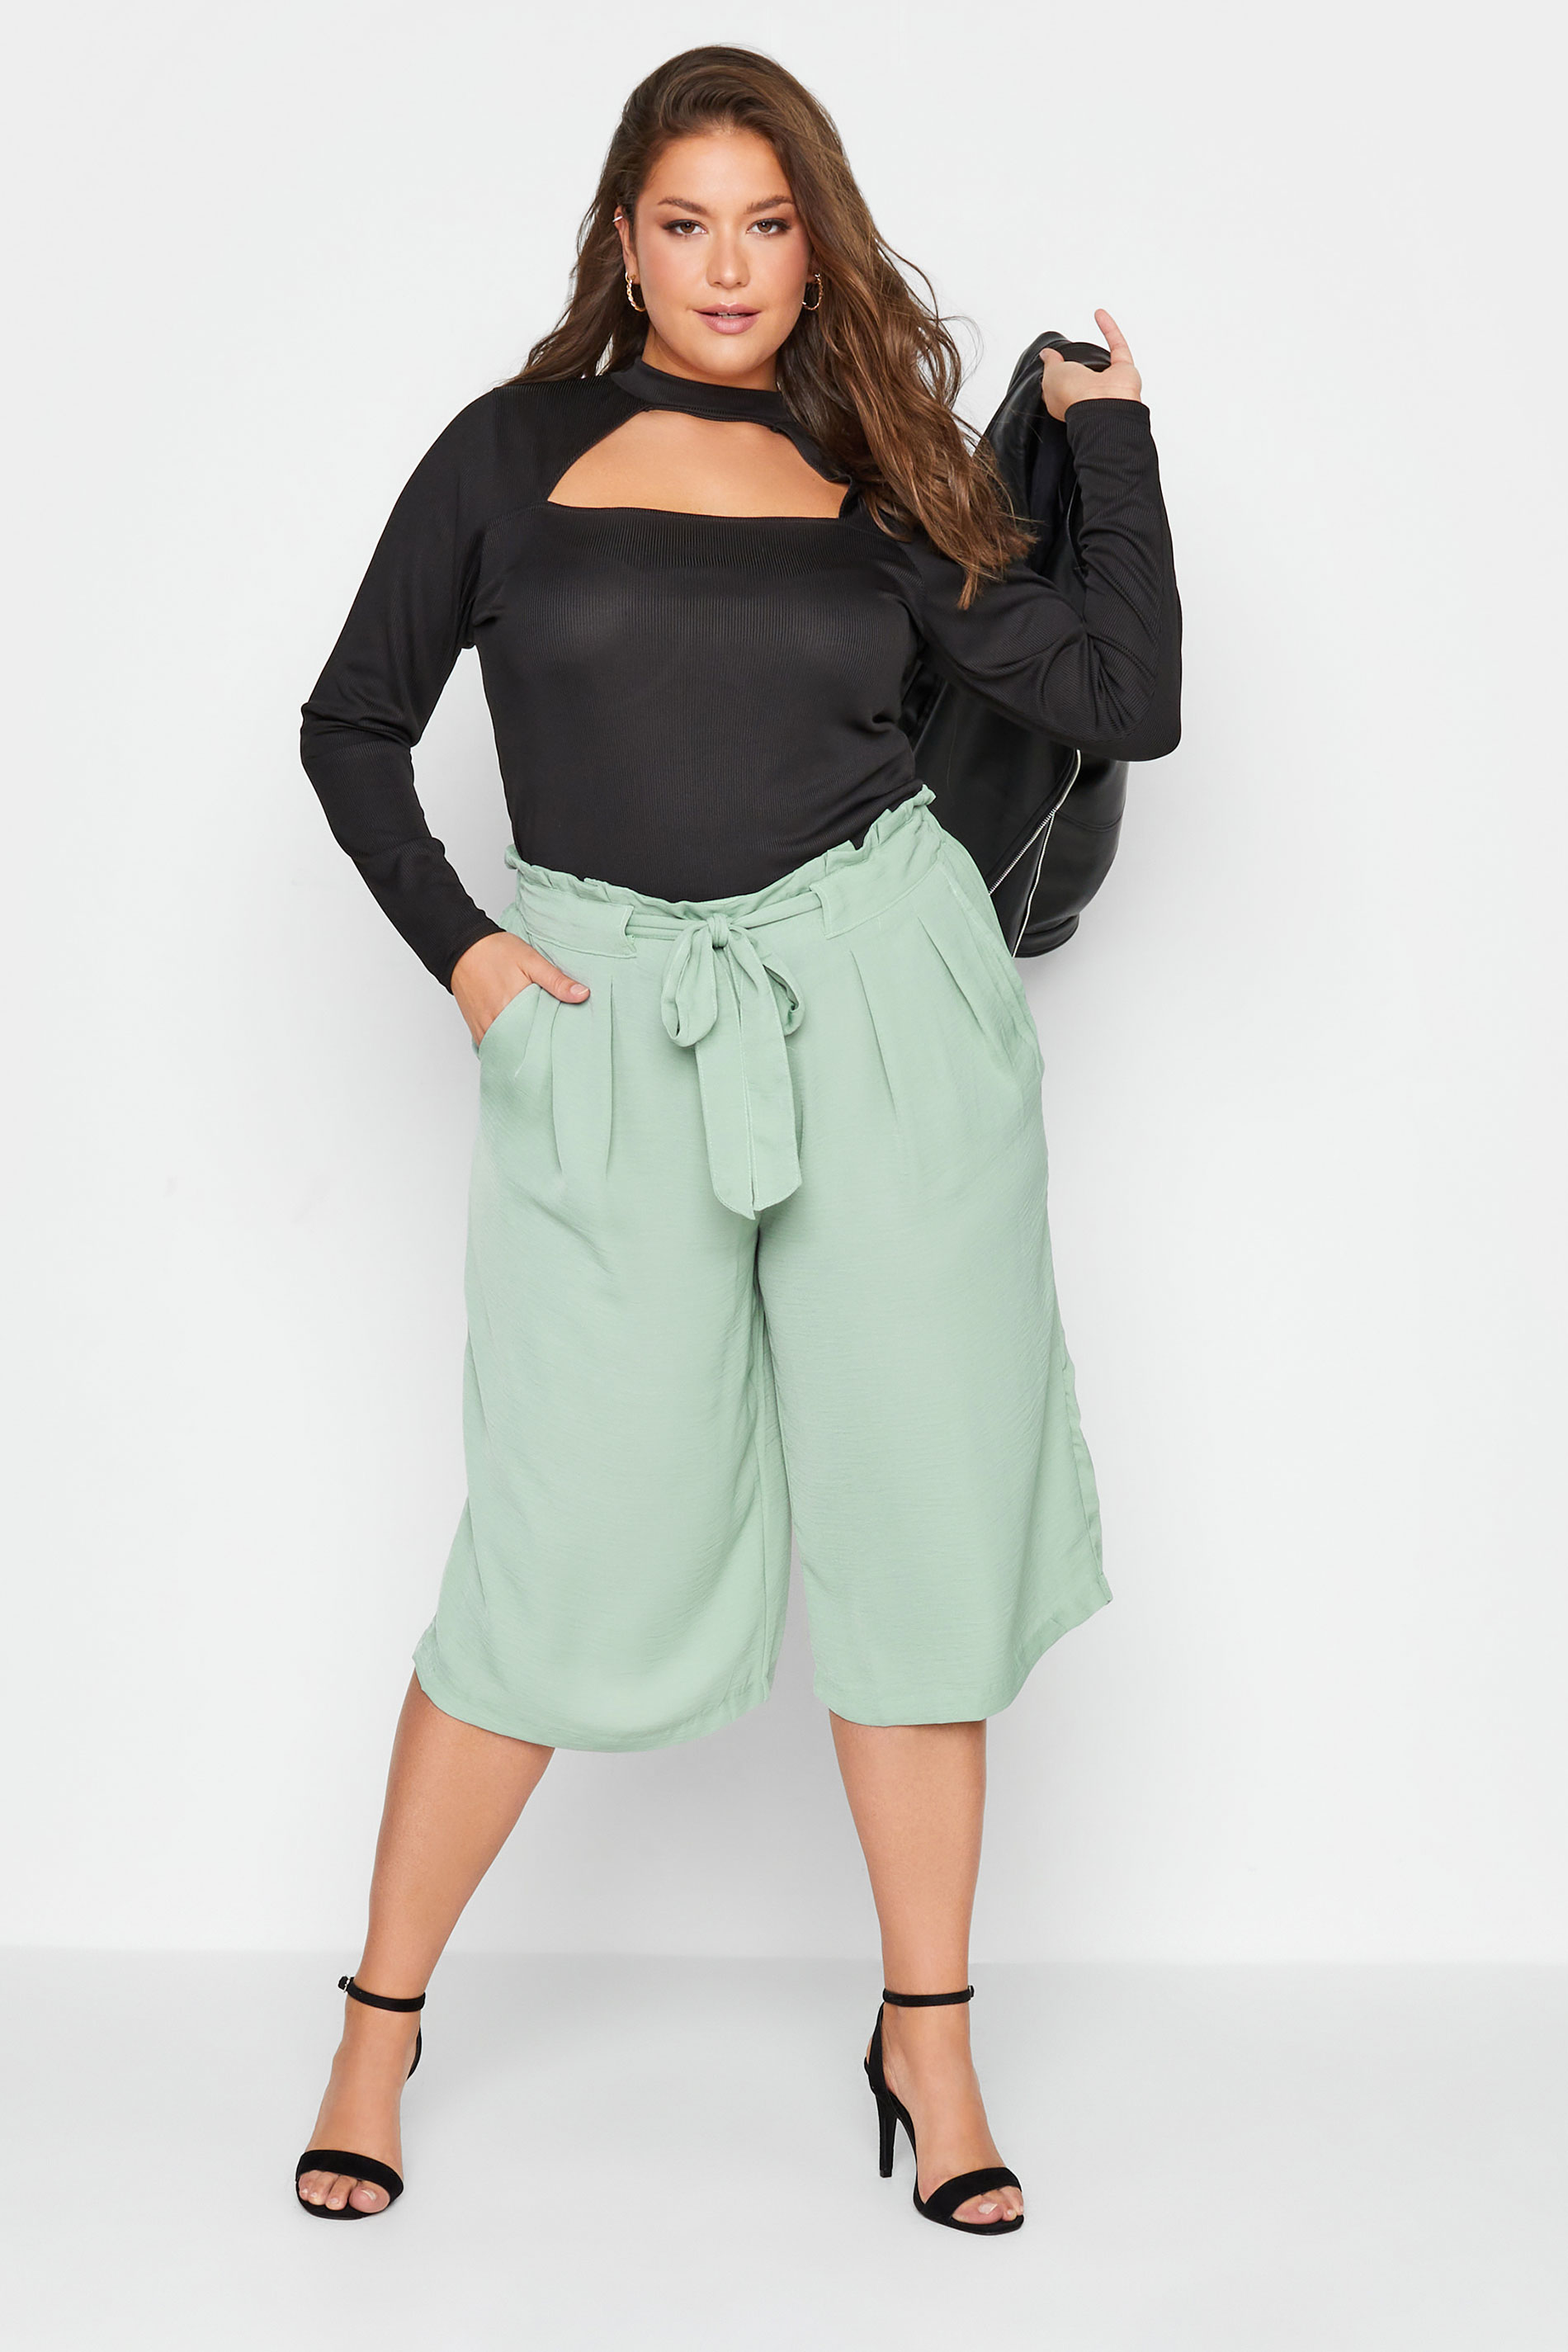 Plus Size Green Paperbag Twill Culottes With High Heel by yoursclothing.com